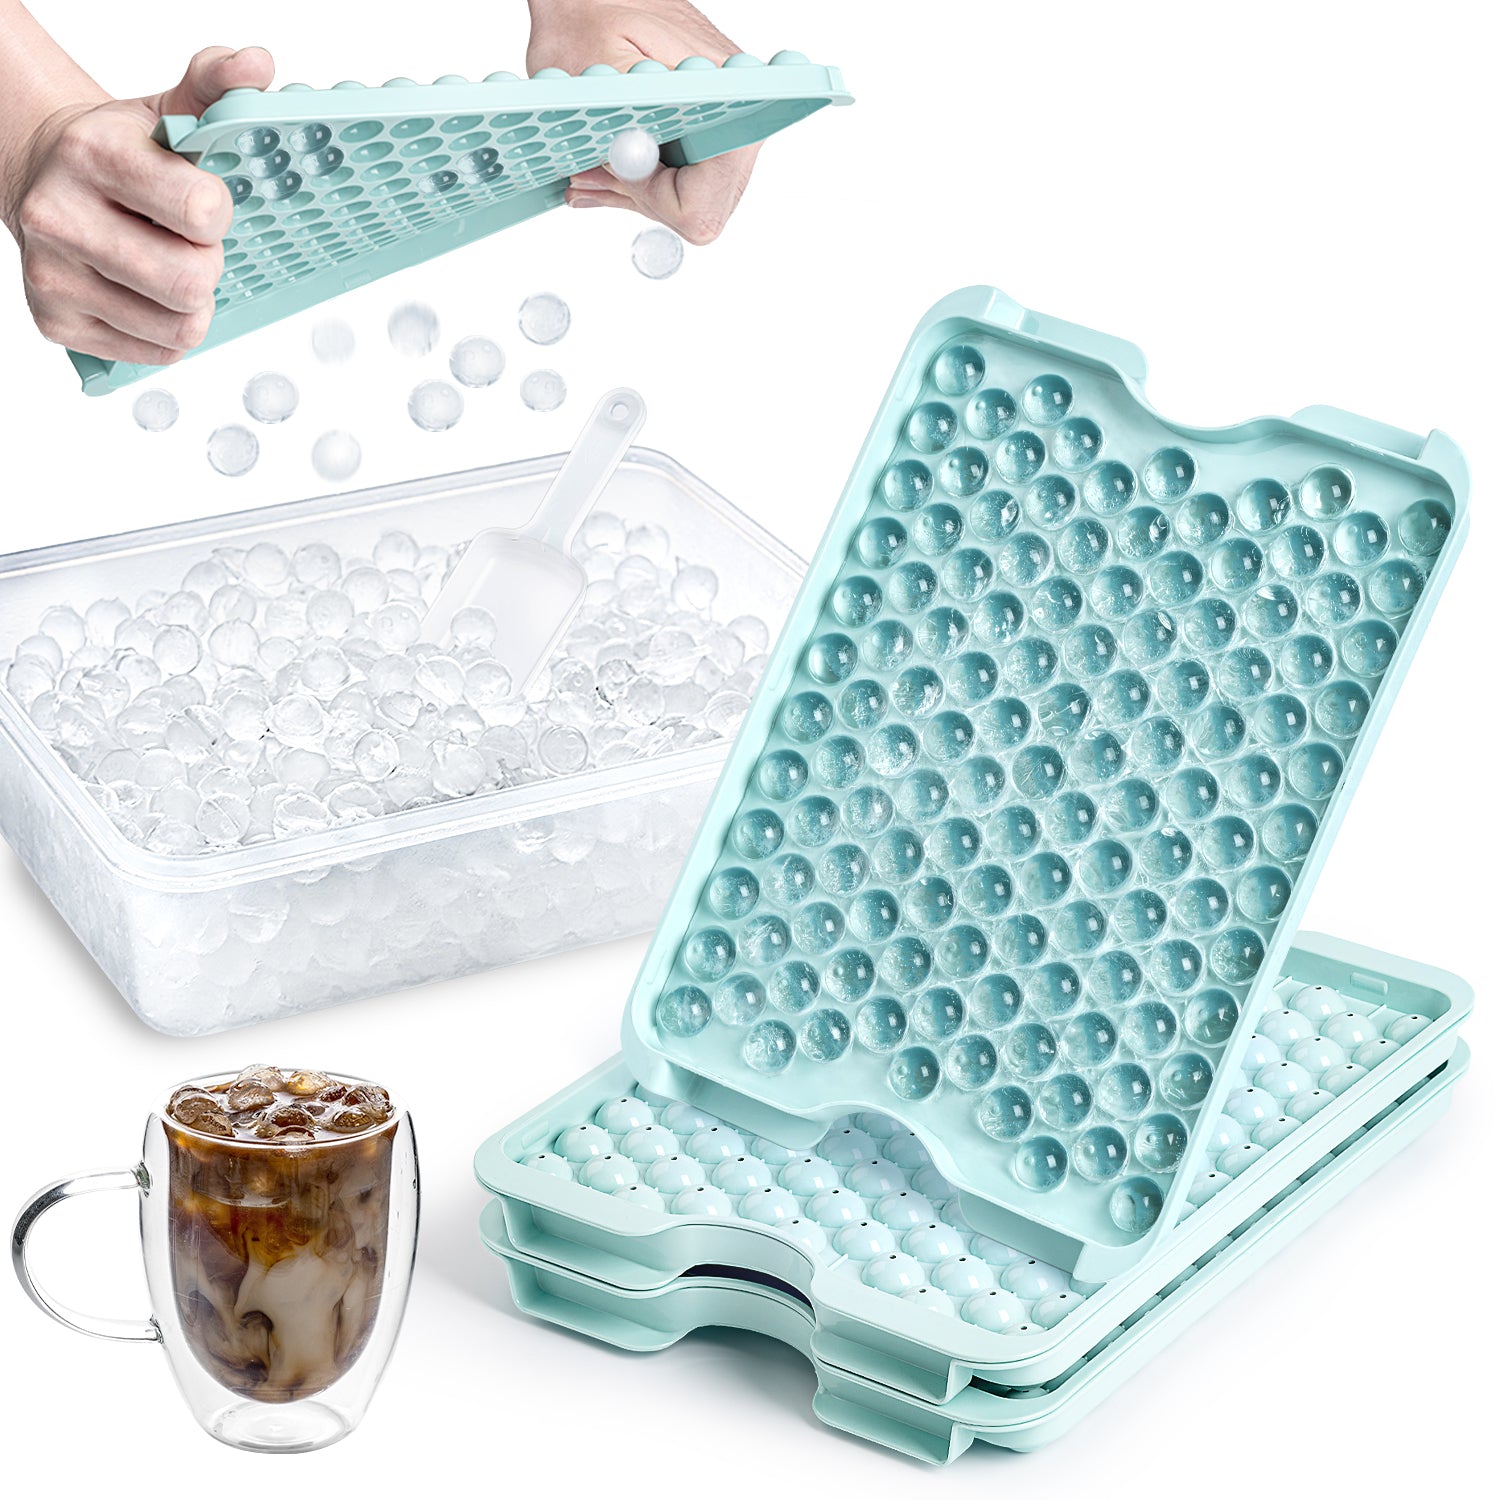 4-Pack: Small Ice Cube Maker Mold with Lid Bin